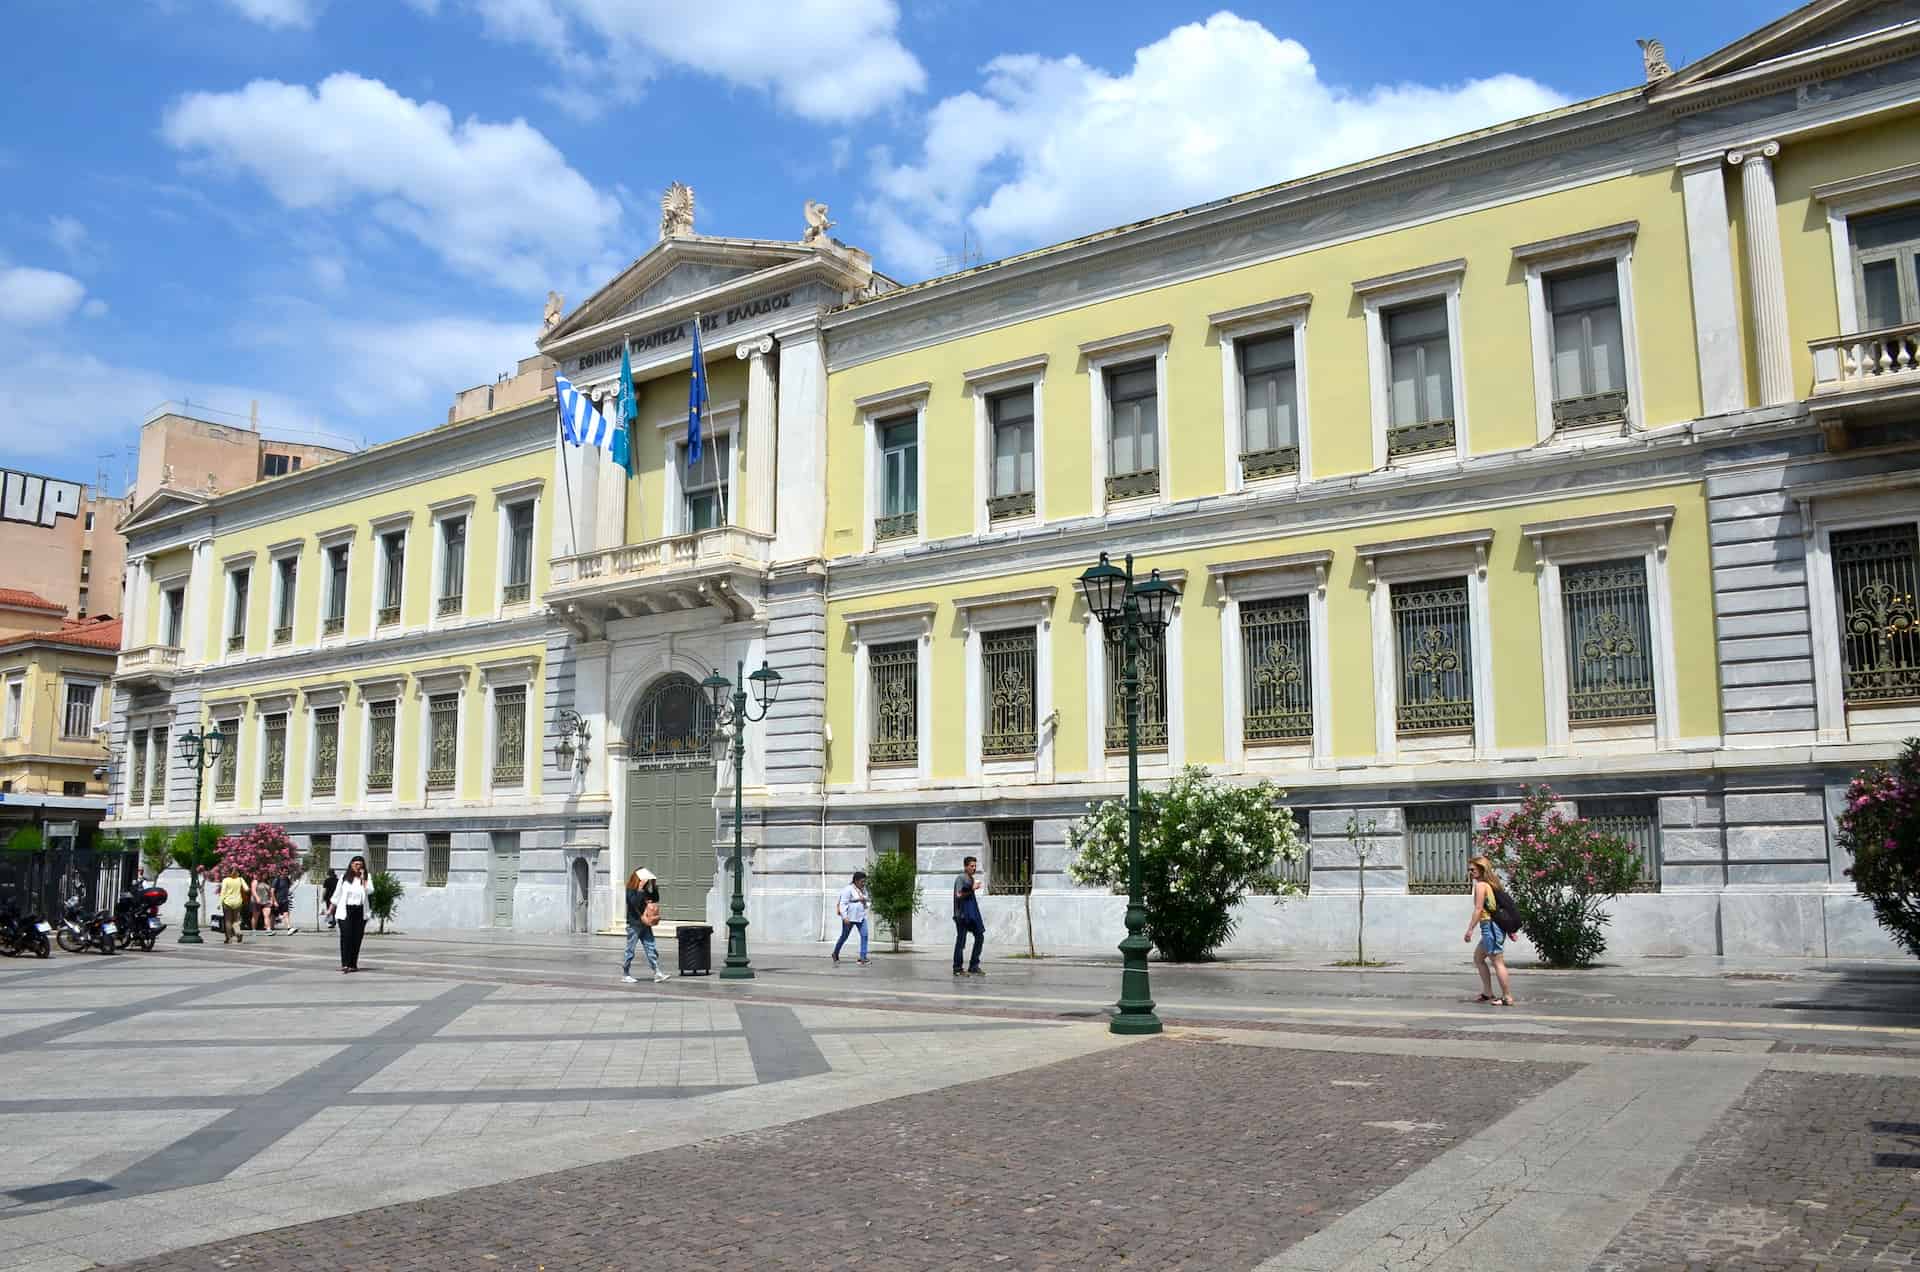 National Bank of Greece on Kotzia Square in Athens, Greece